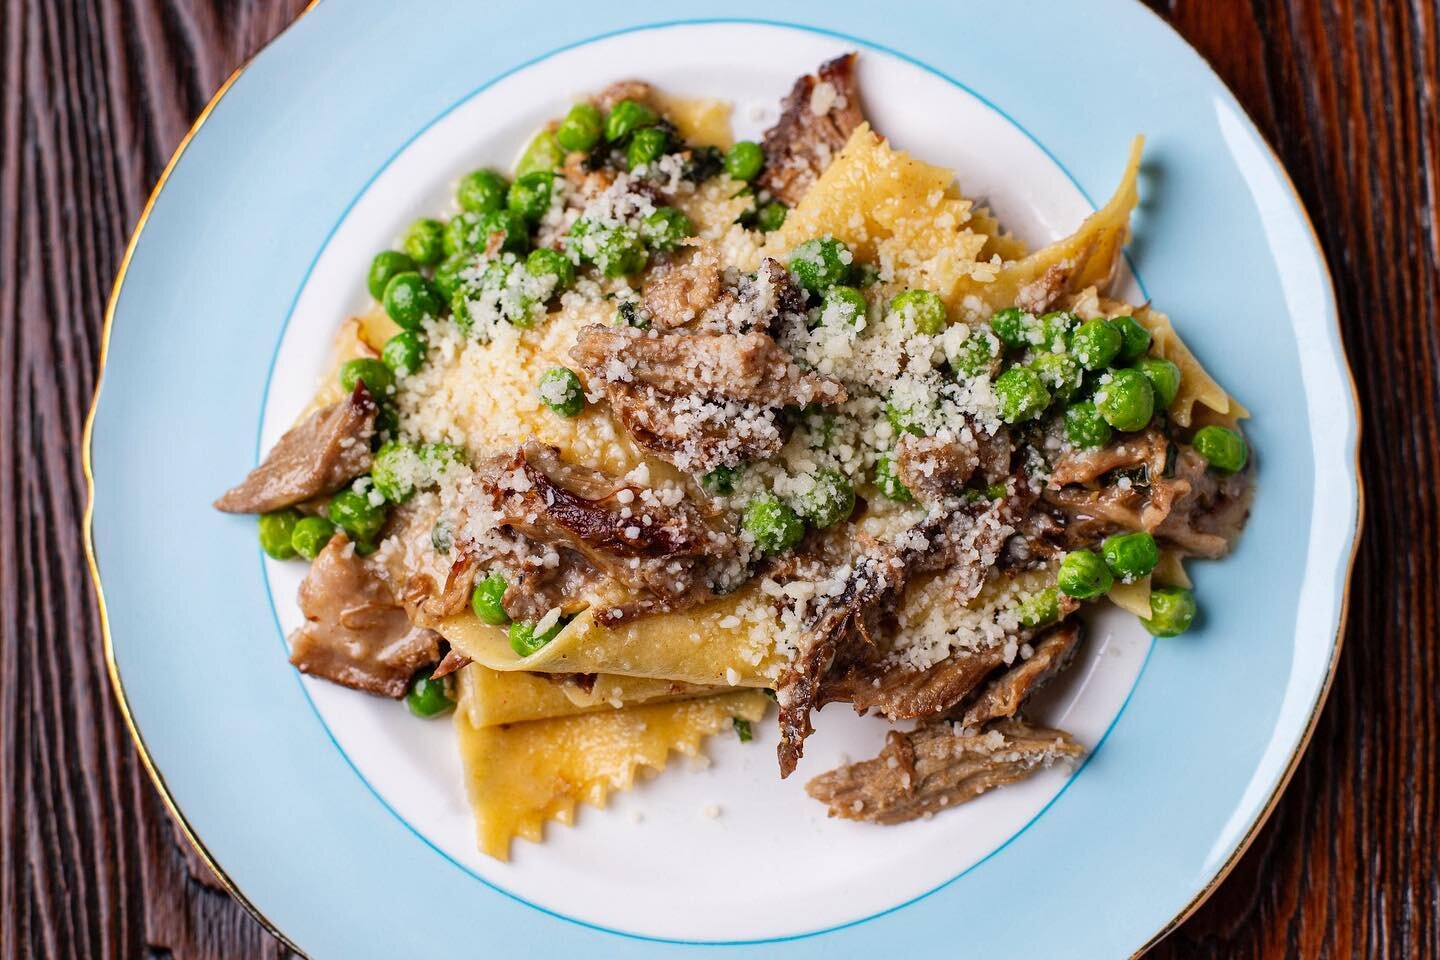 Have you tried our new Spring pasta dishes yet? This is our house made hand cut pasta, with roasted Lamb, Peas, Mint &amp; Pecorino. Available in both a small and large portion, it is perfect for sharing! Available on our dinner menu as well as @uber